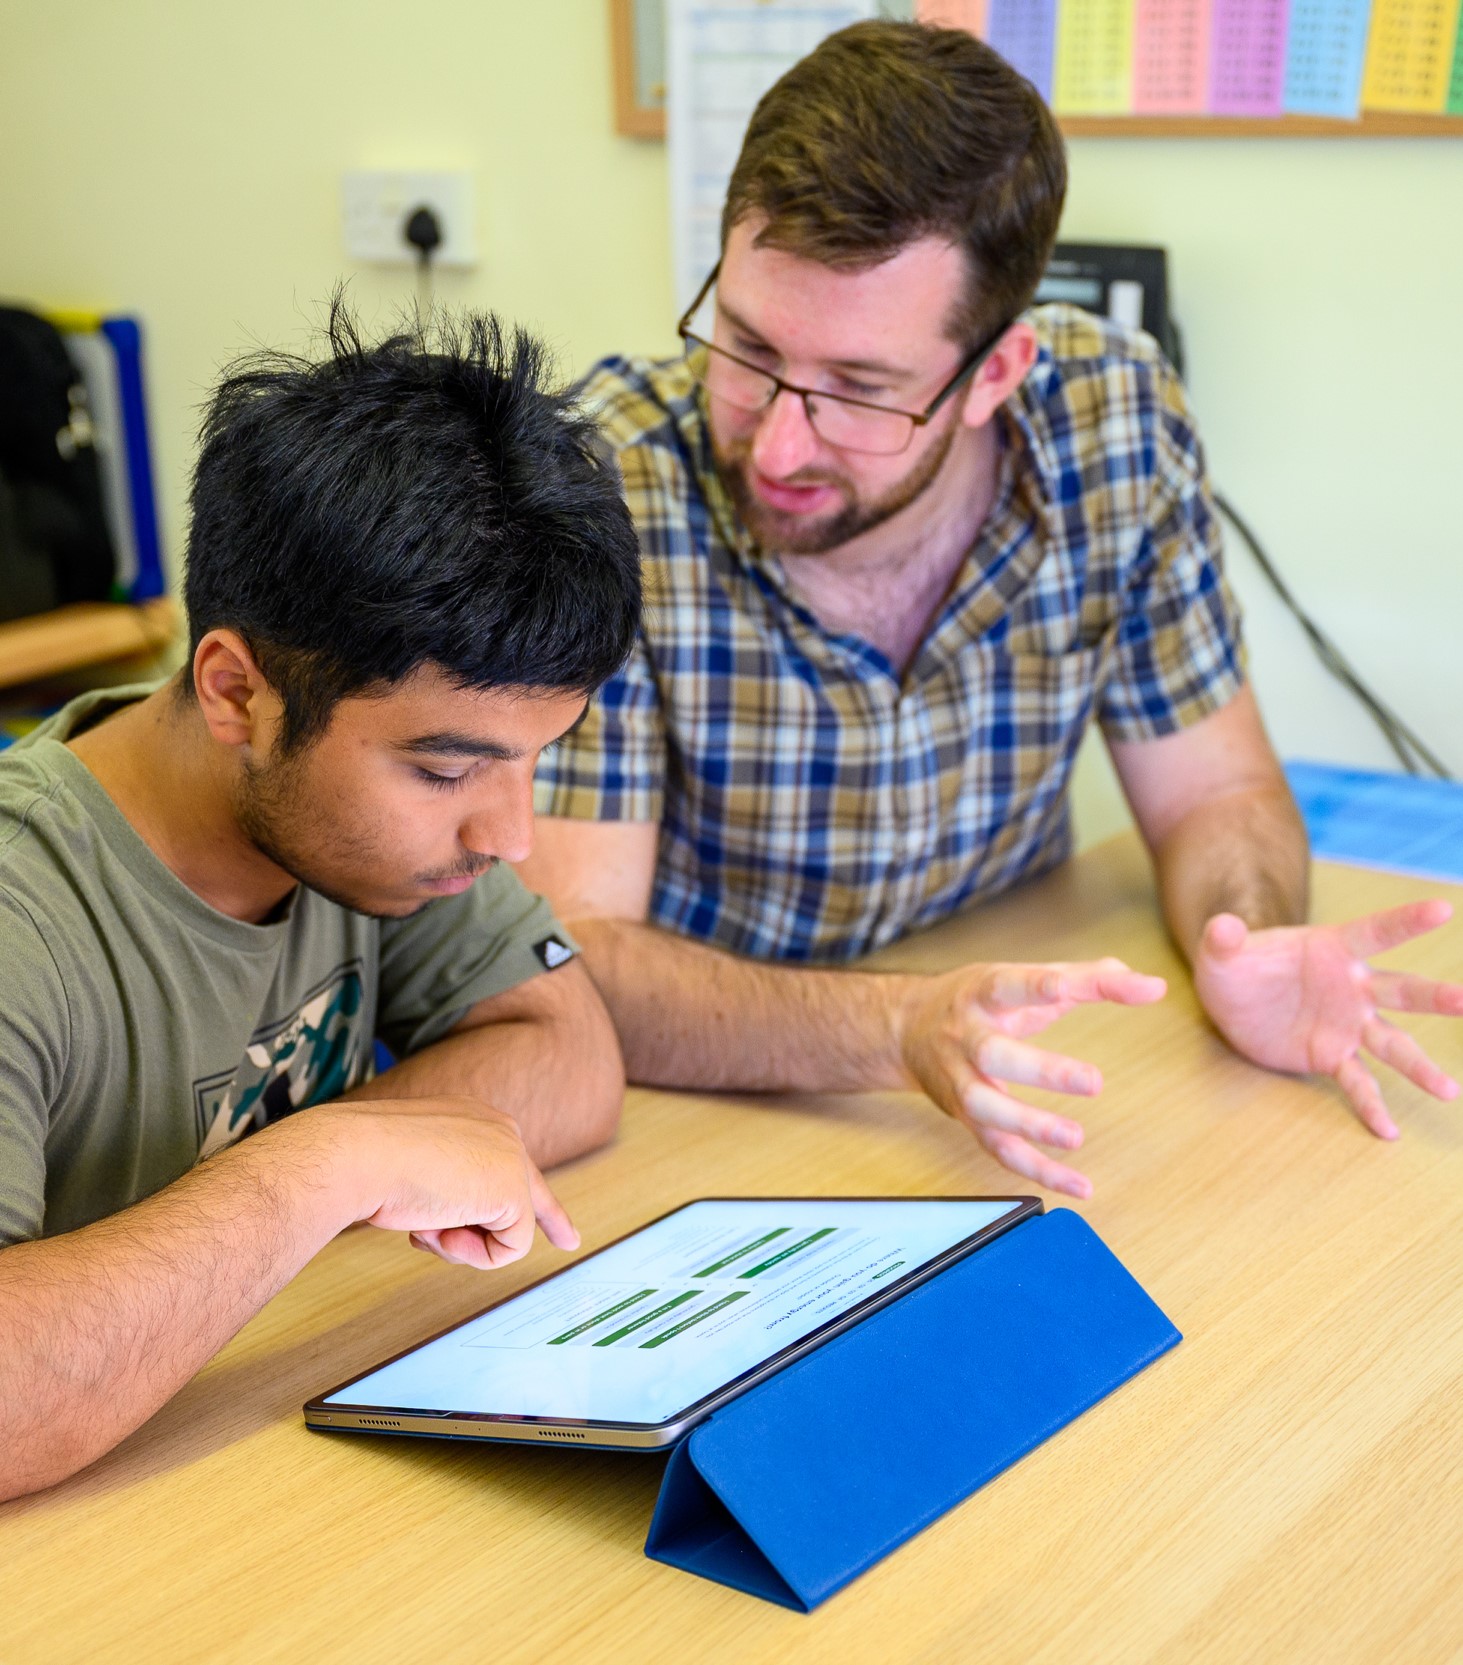 A student works on his iPad with a tutor